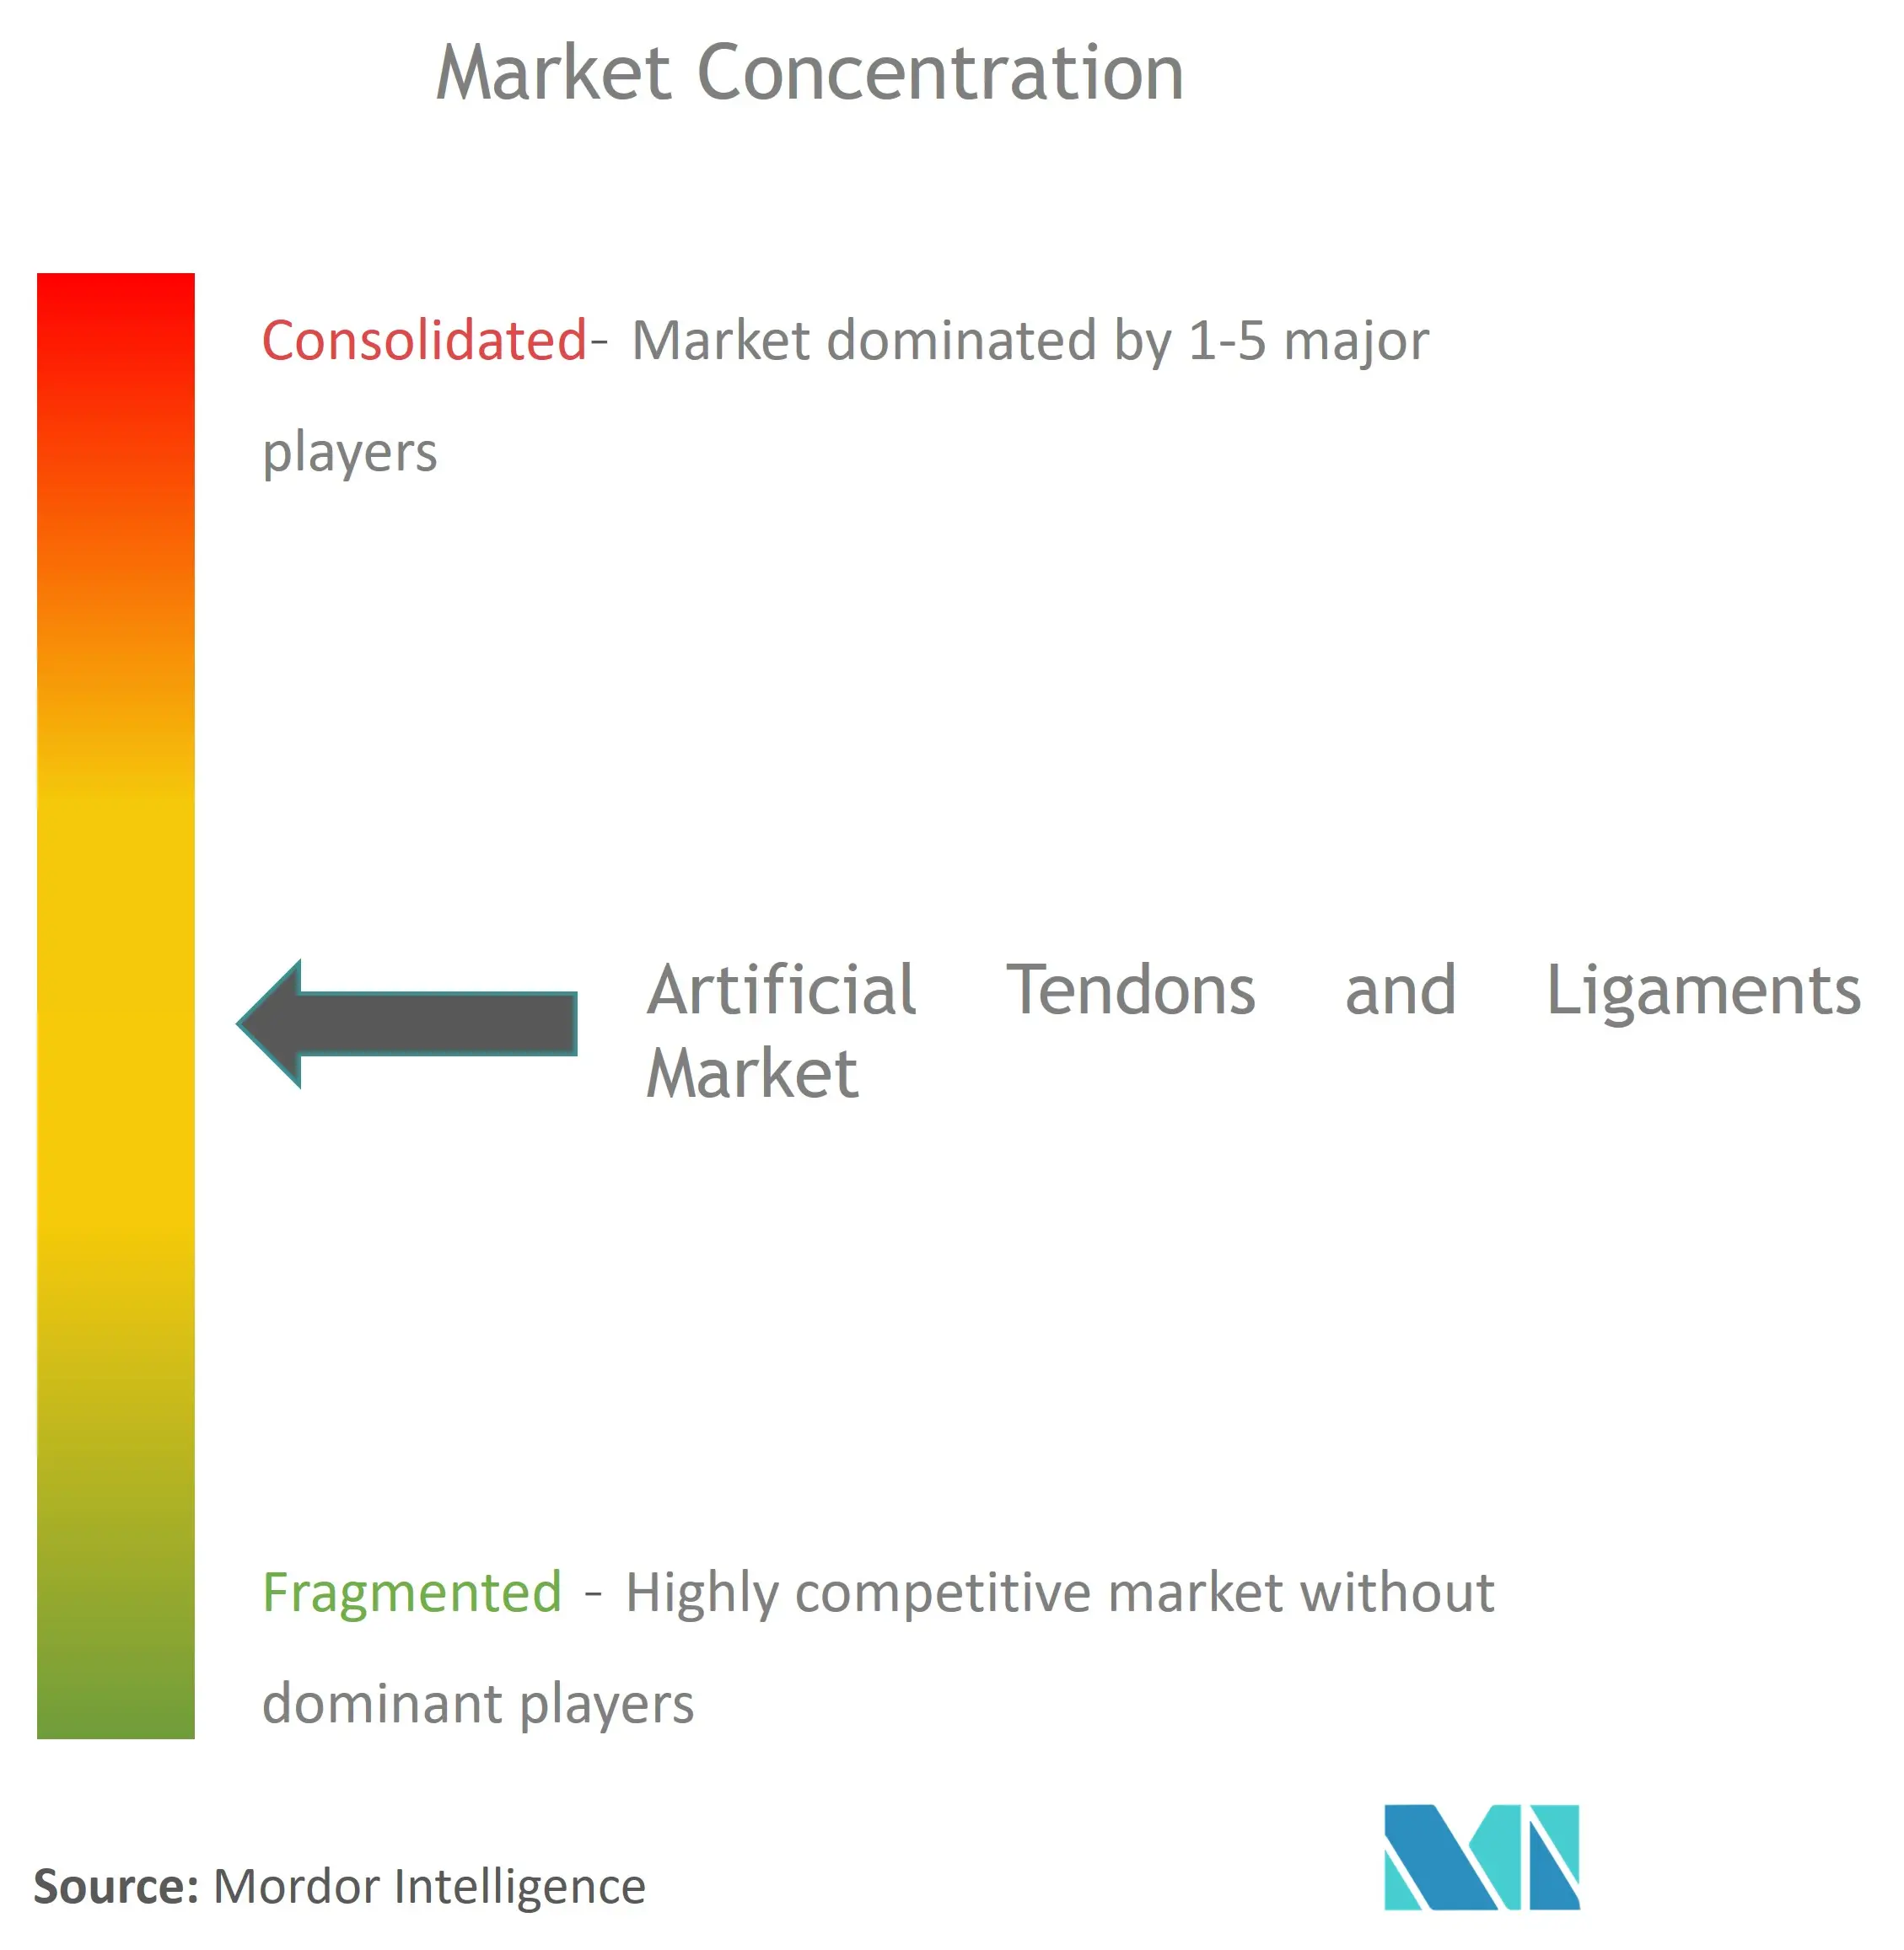 Global Artificial Tendons and Ligaments Market Concentration